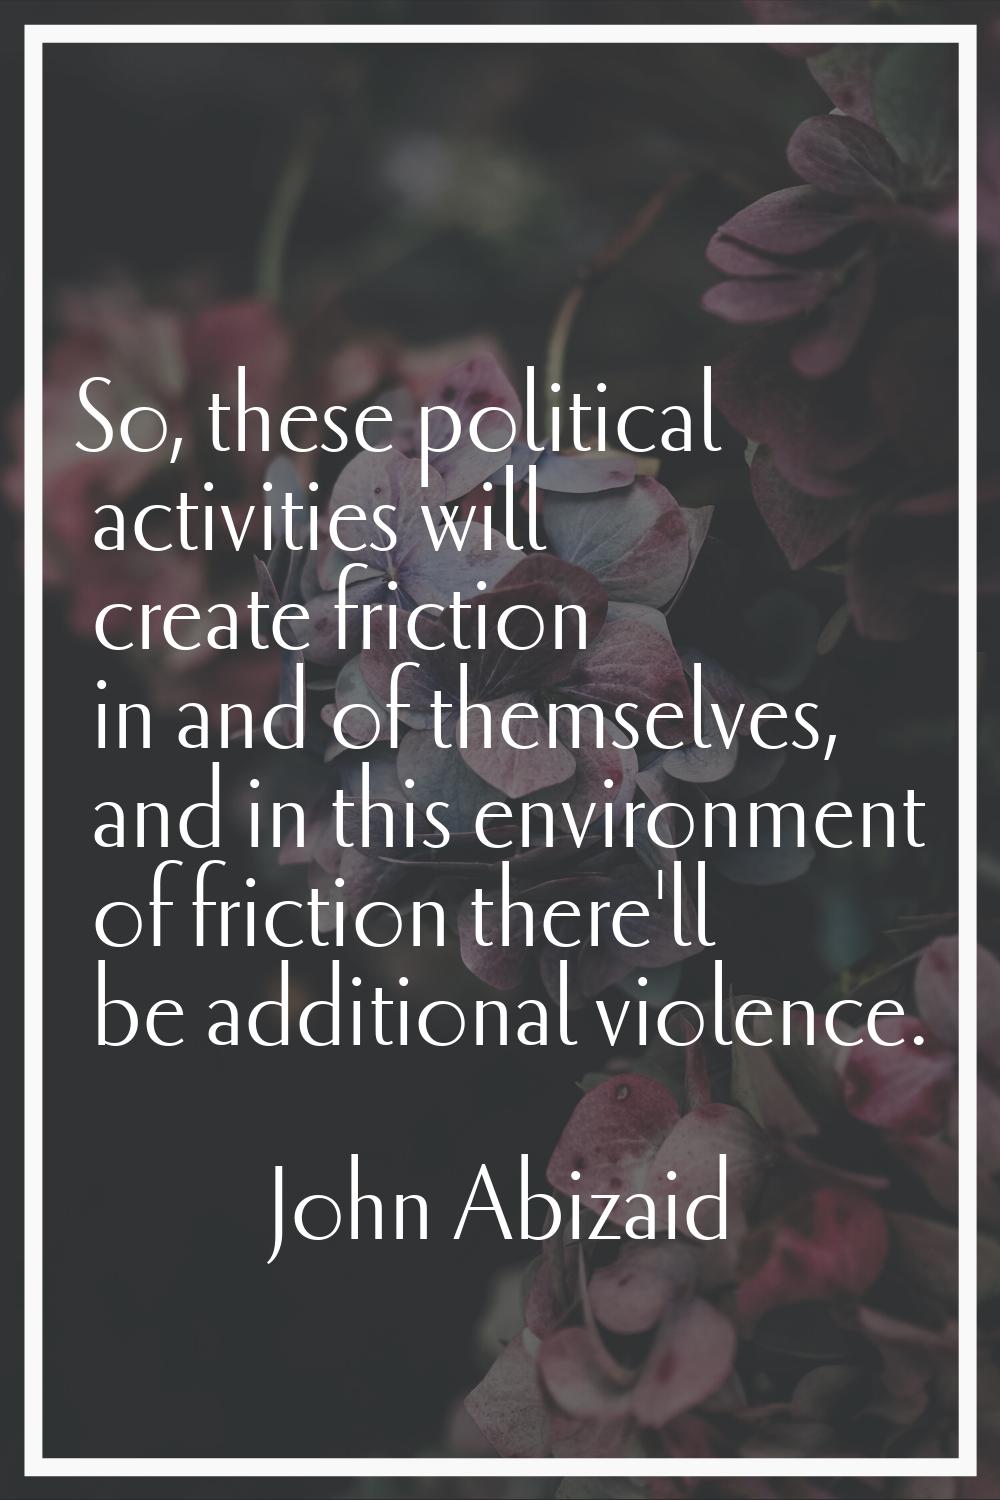 So, these political activities will create friction in and of themselves, and in this environment o